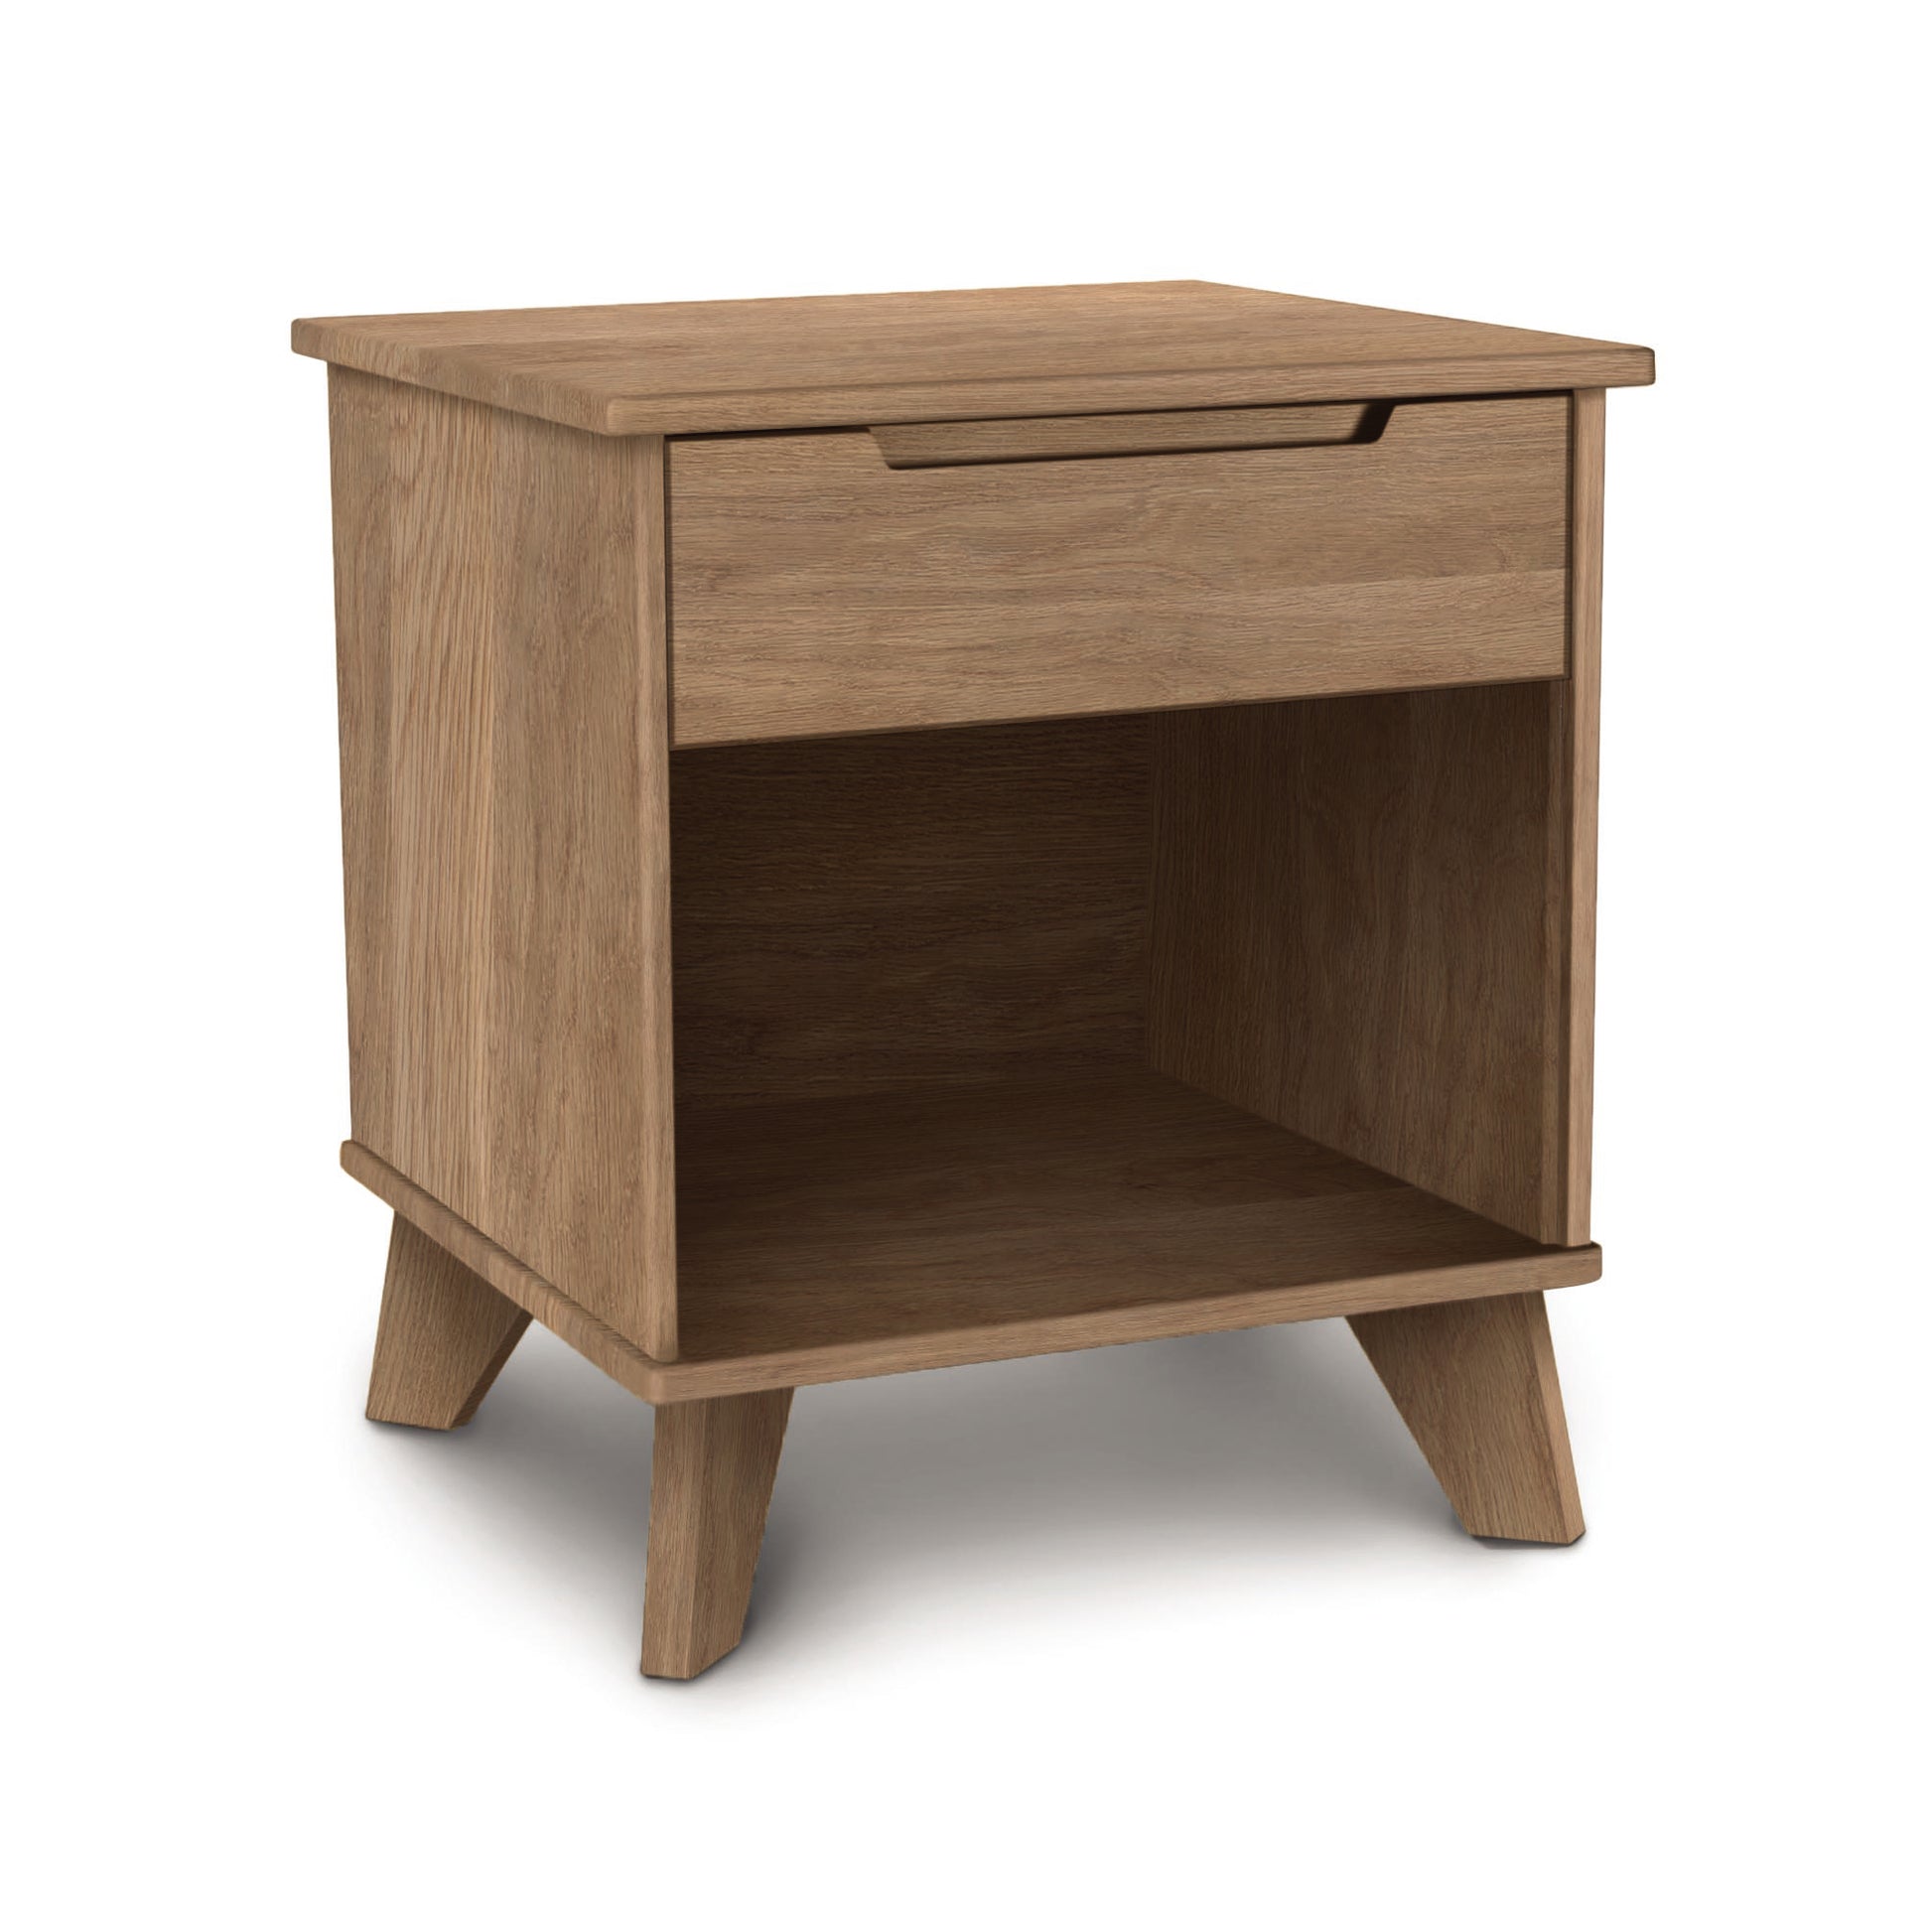 A sustainable Linn 1-Drawer Enclosed Shelf Nightstand from Copeland Furniture with a drawer.